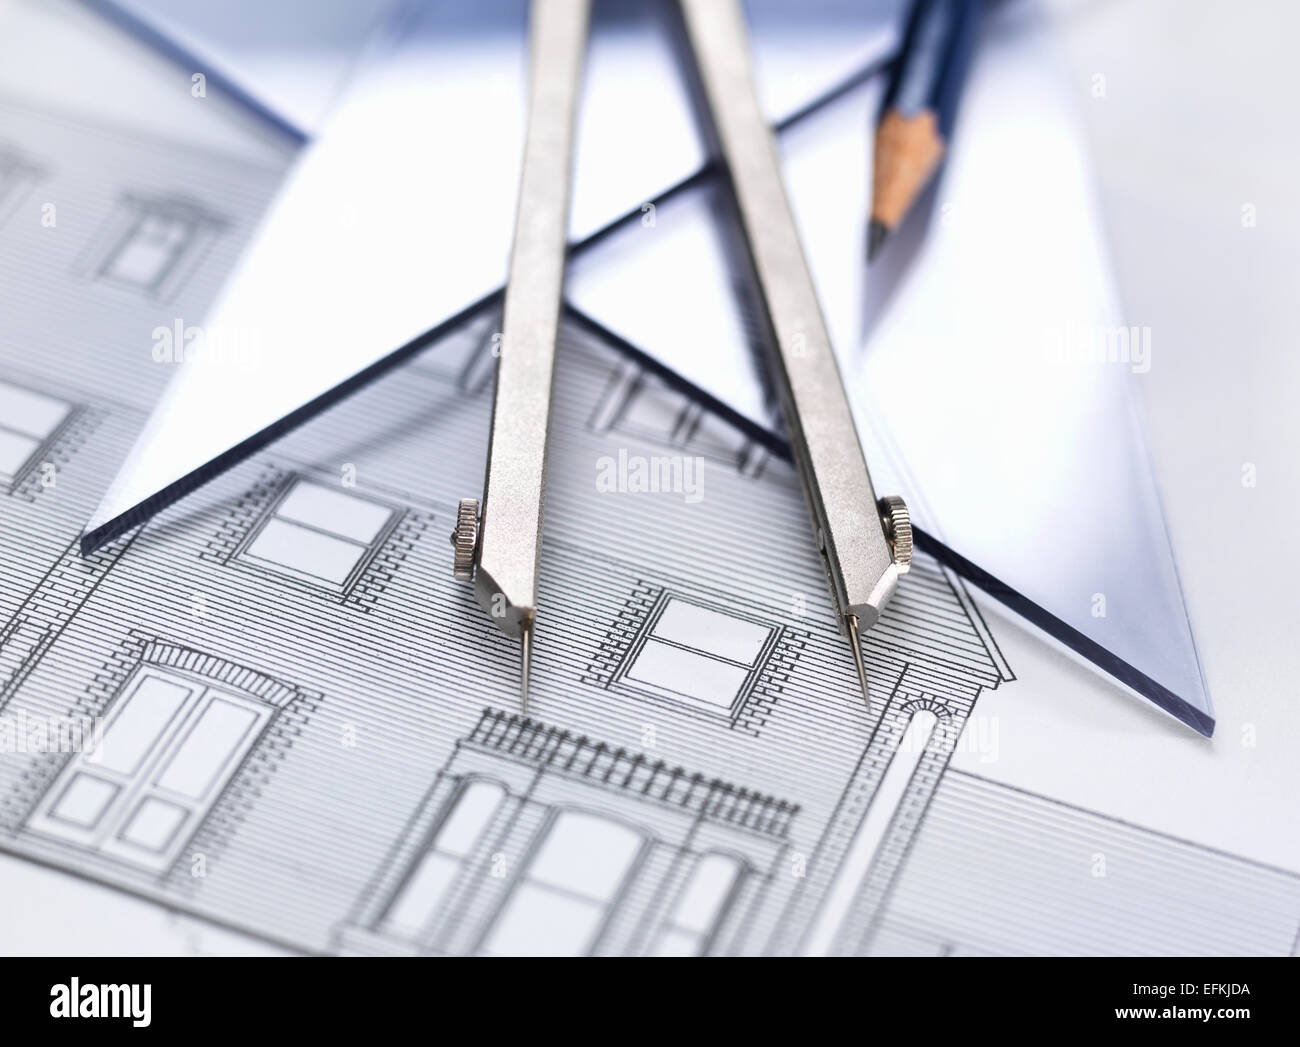 Architectural drawing with drawing equipment Stock Photo